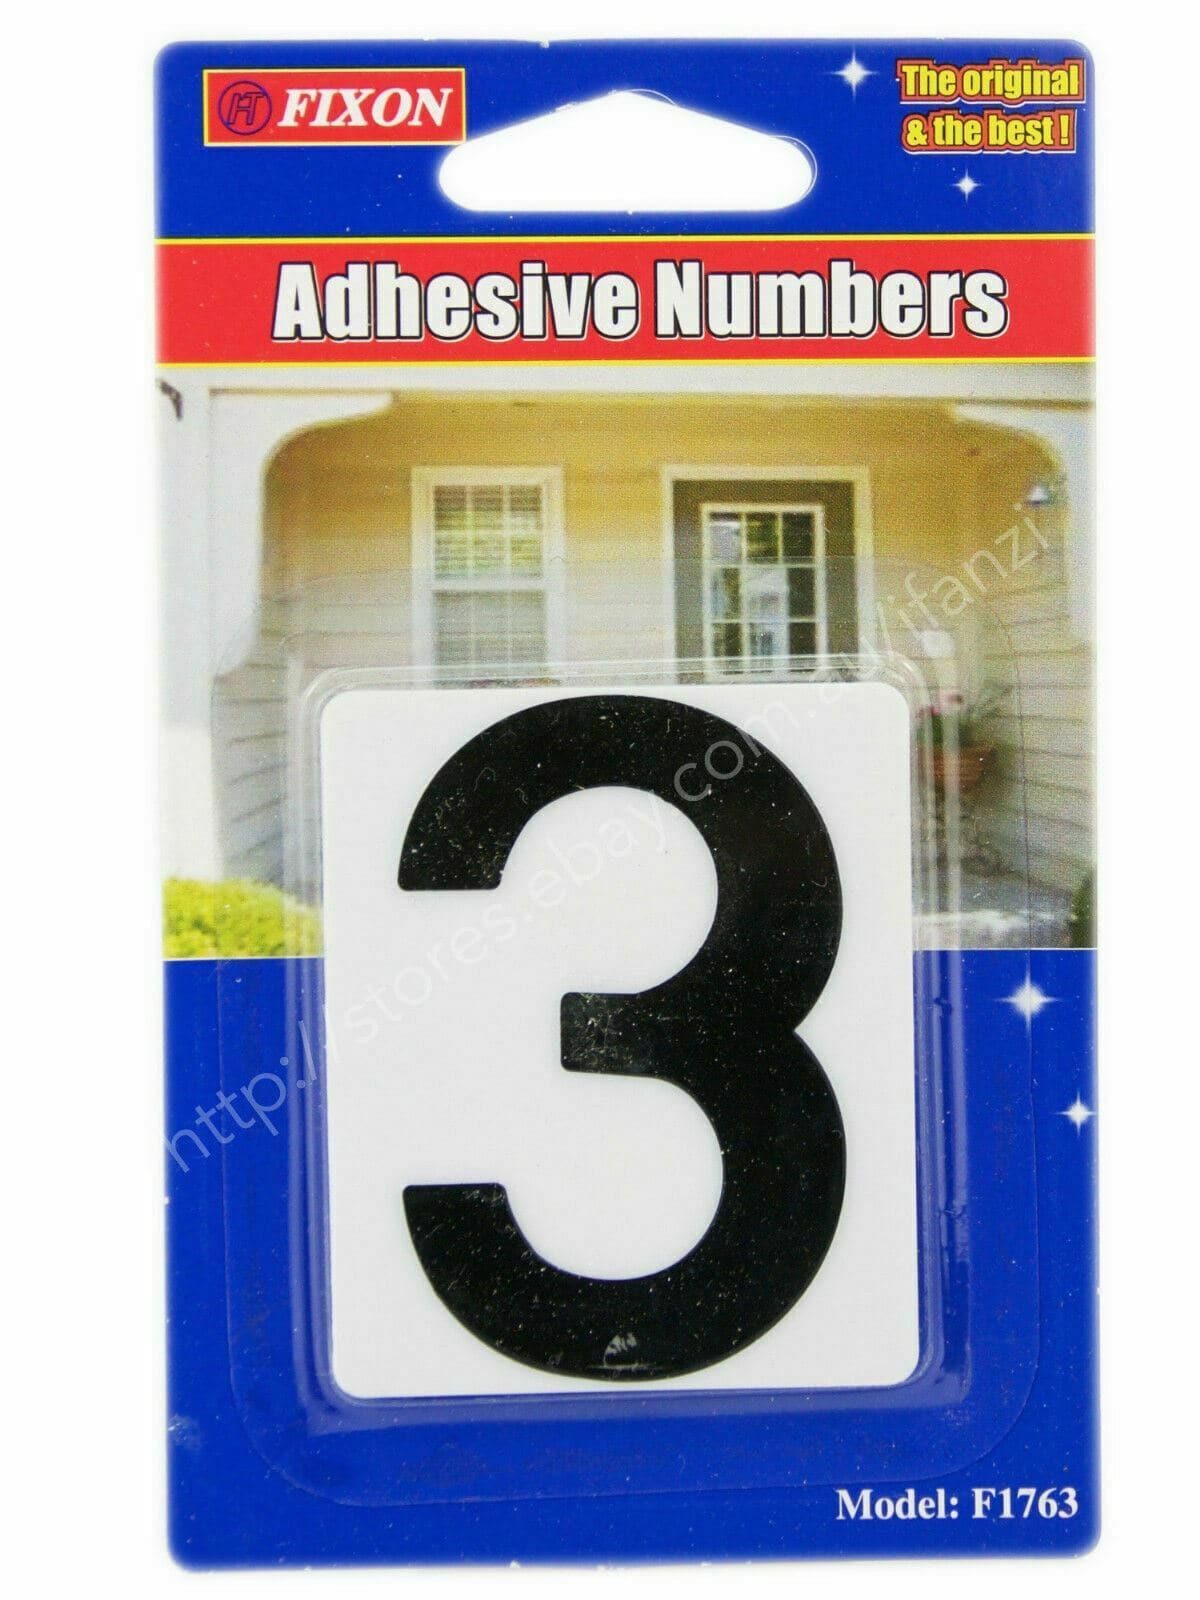 Fixon Adhesive Number Sign For House Street Letterbox Number 59x49x2mm F1763 - Double Bay Hardware